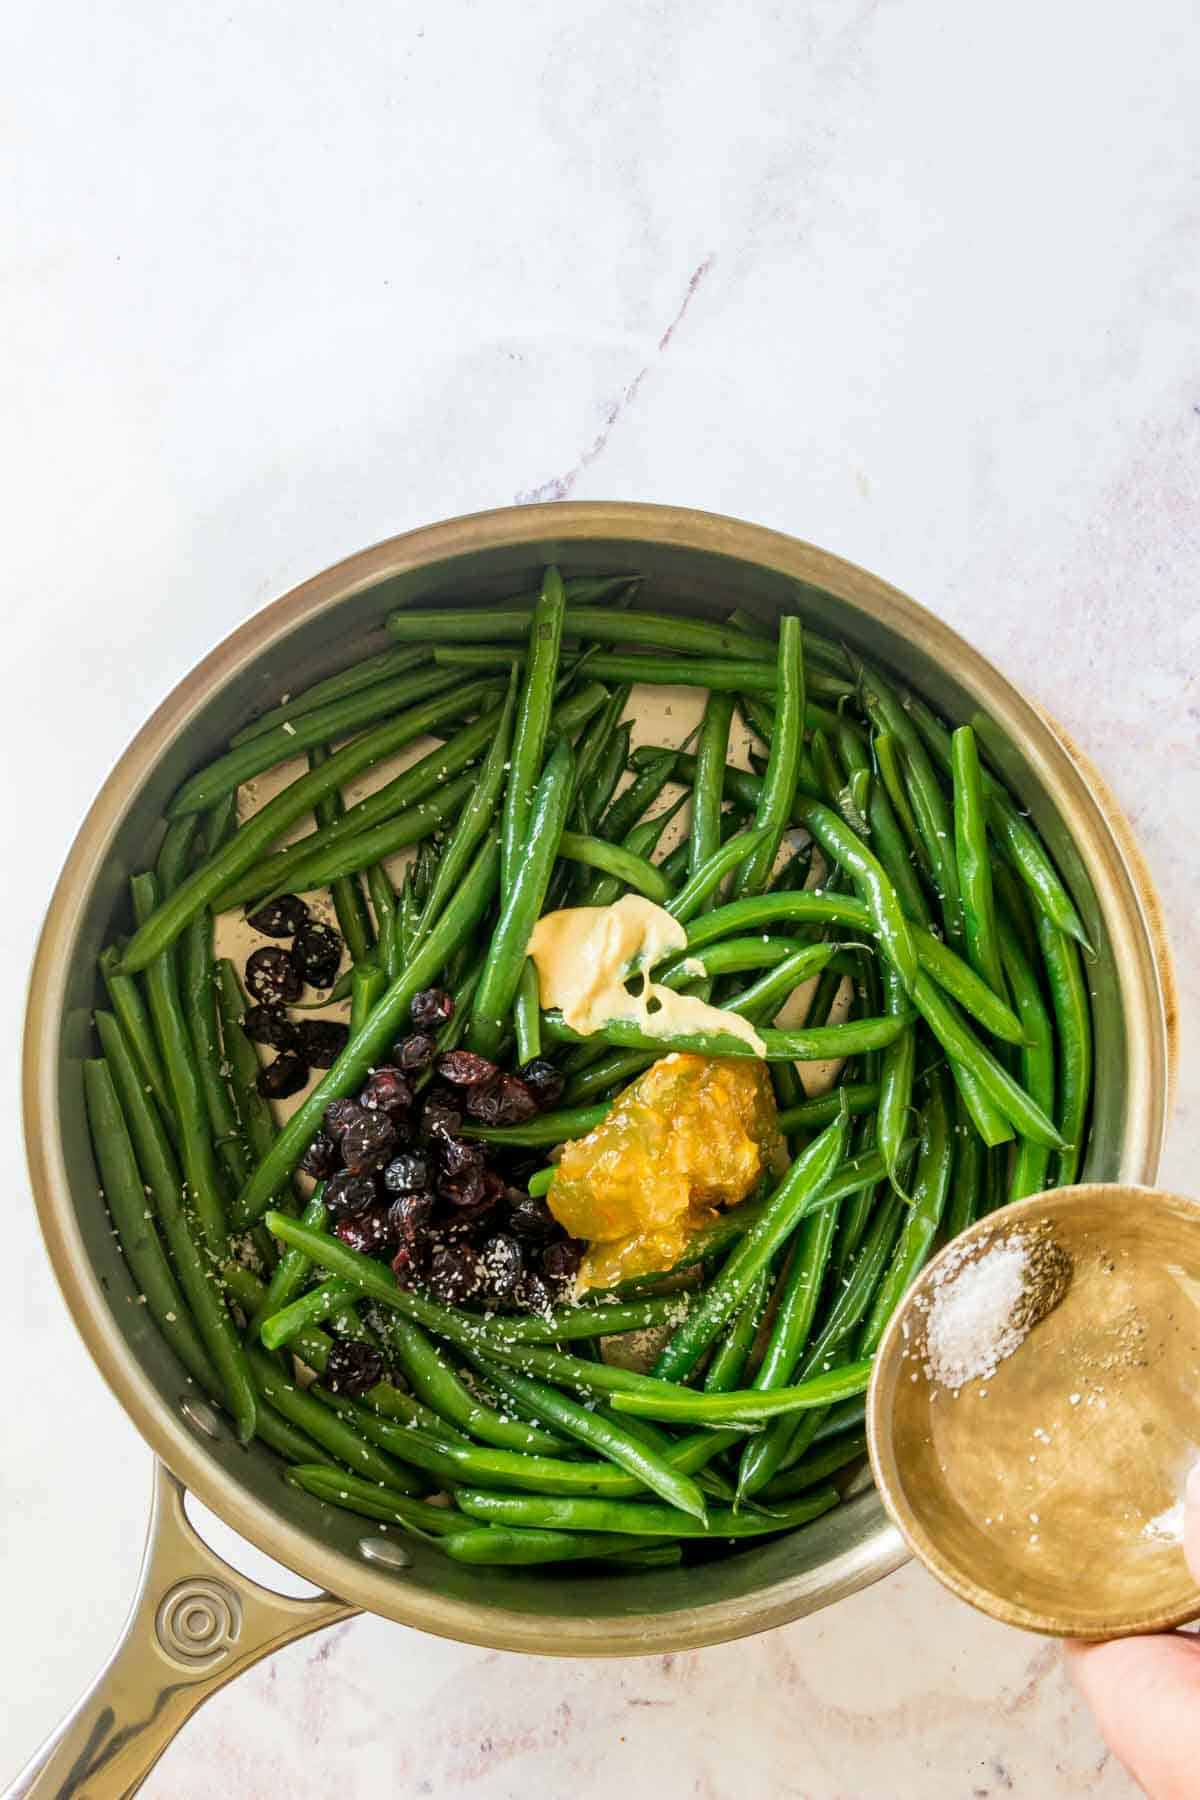 Salt and pepper bring sprinkled on a green beans in a skillet that have Dijon mustard, orange marmalade, and dried cranberries on top.